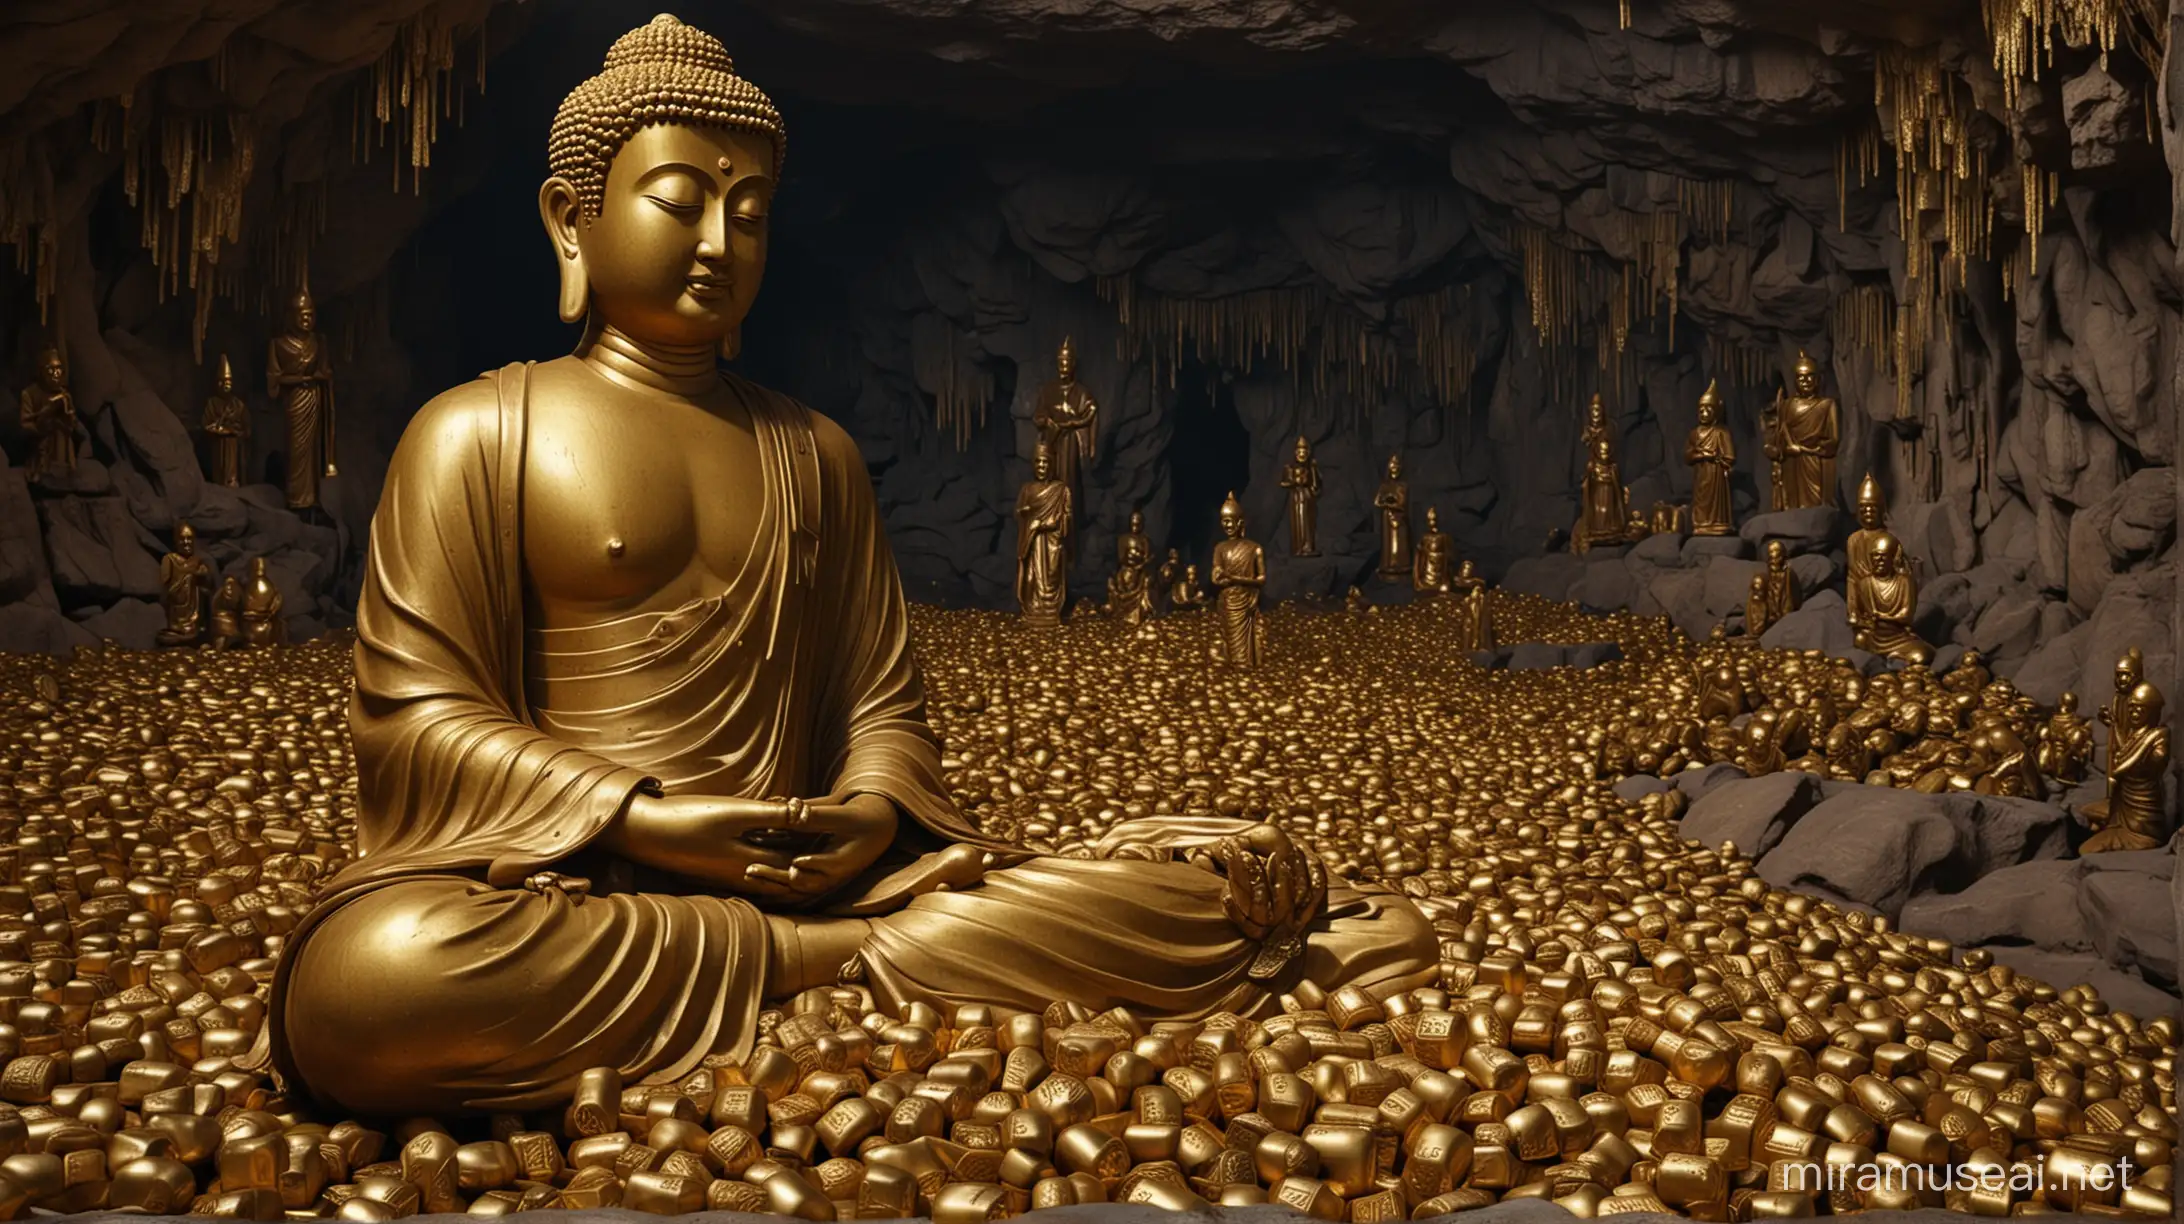 Golden Buddha Statue Among Treasure and Fallen Soldiers in Dark Cave